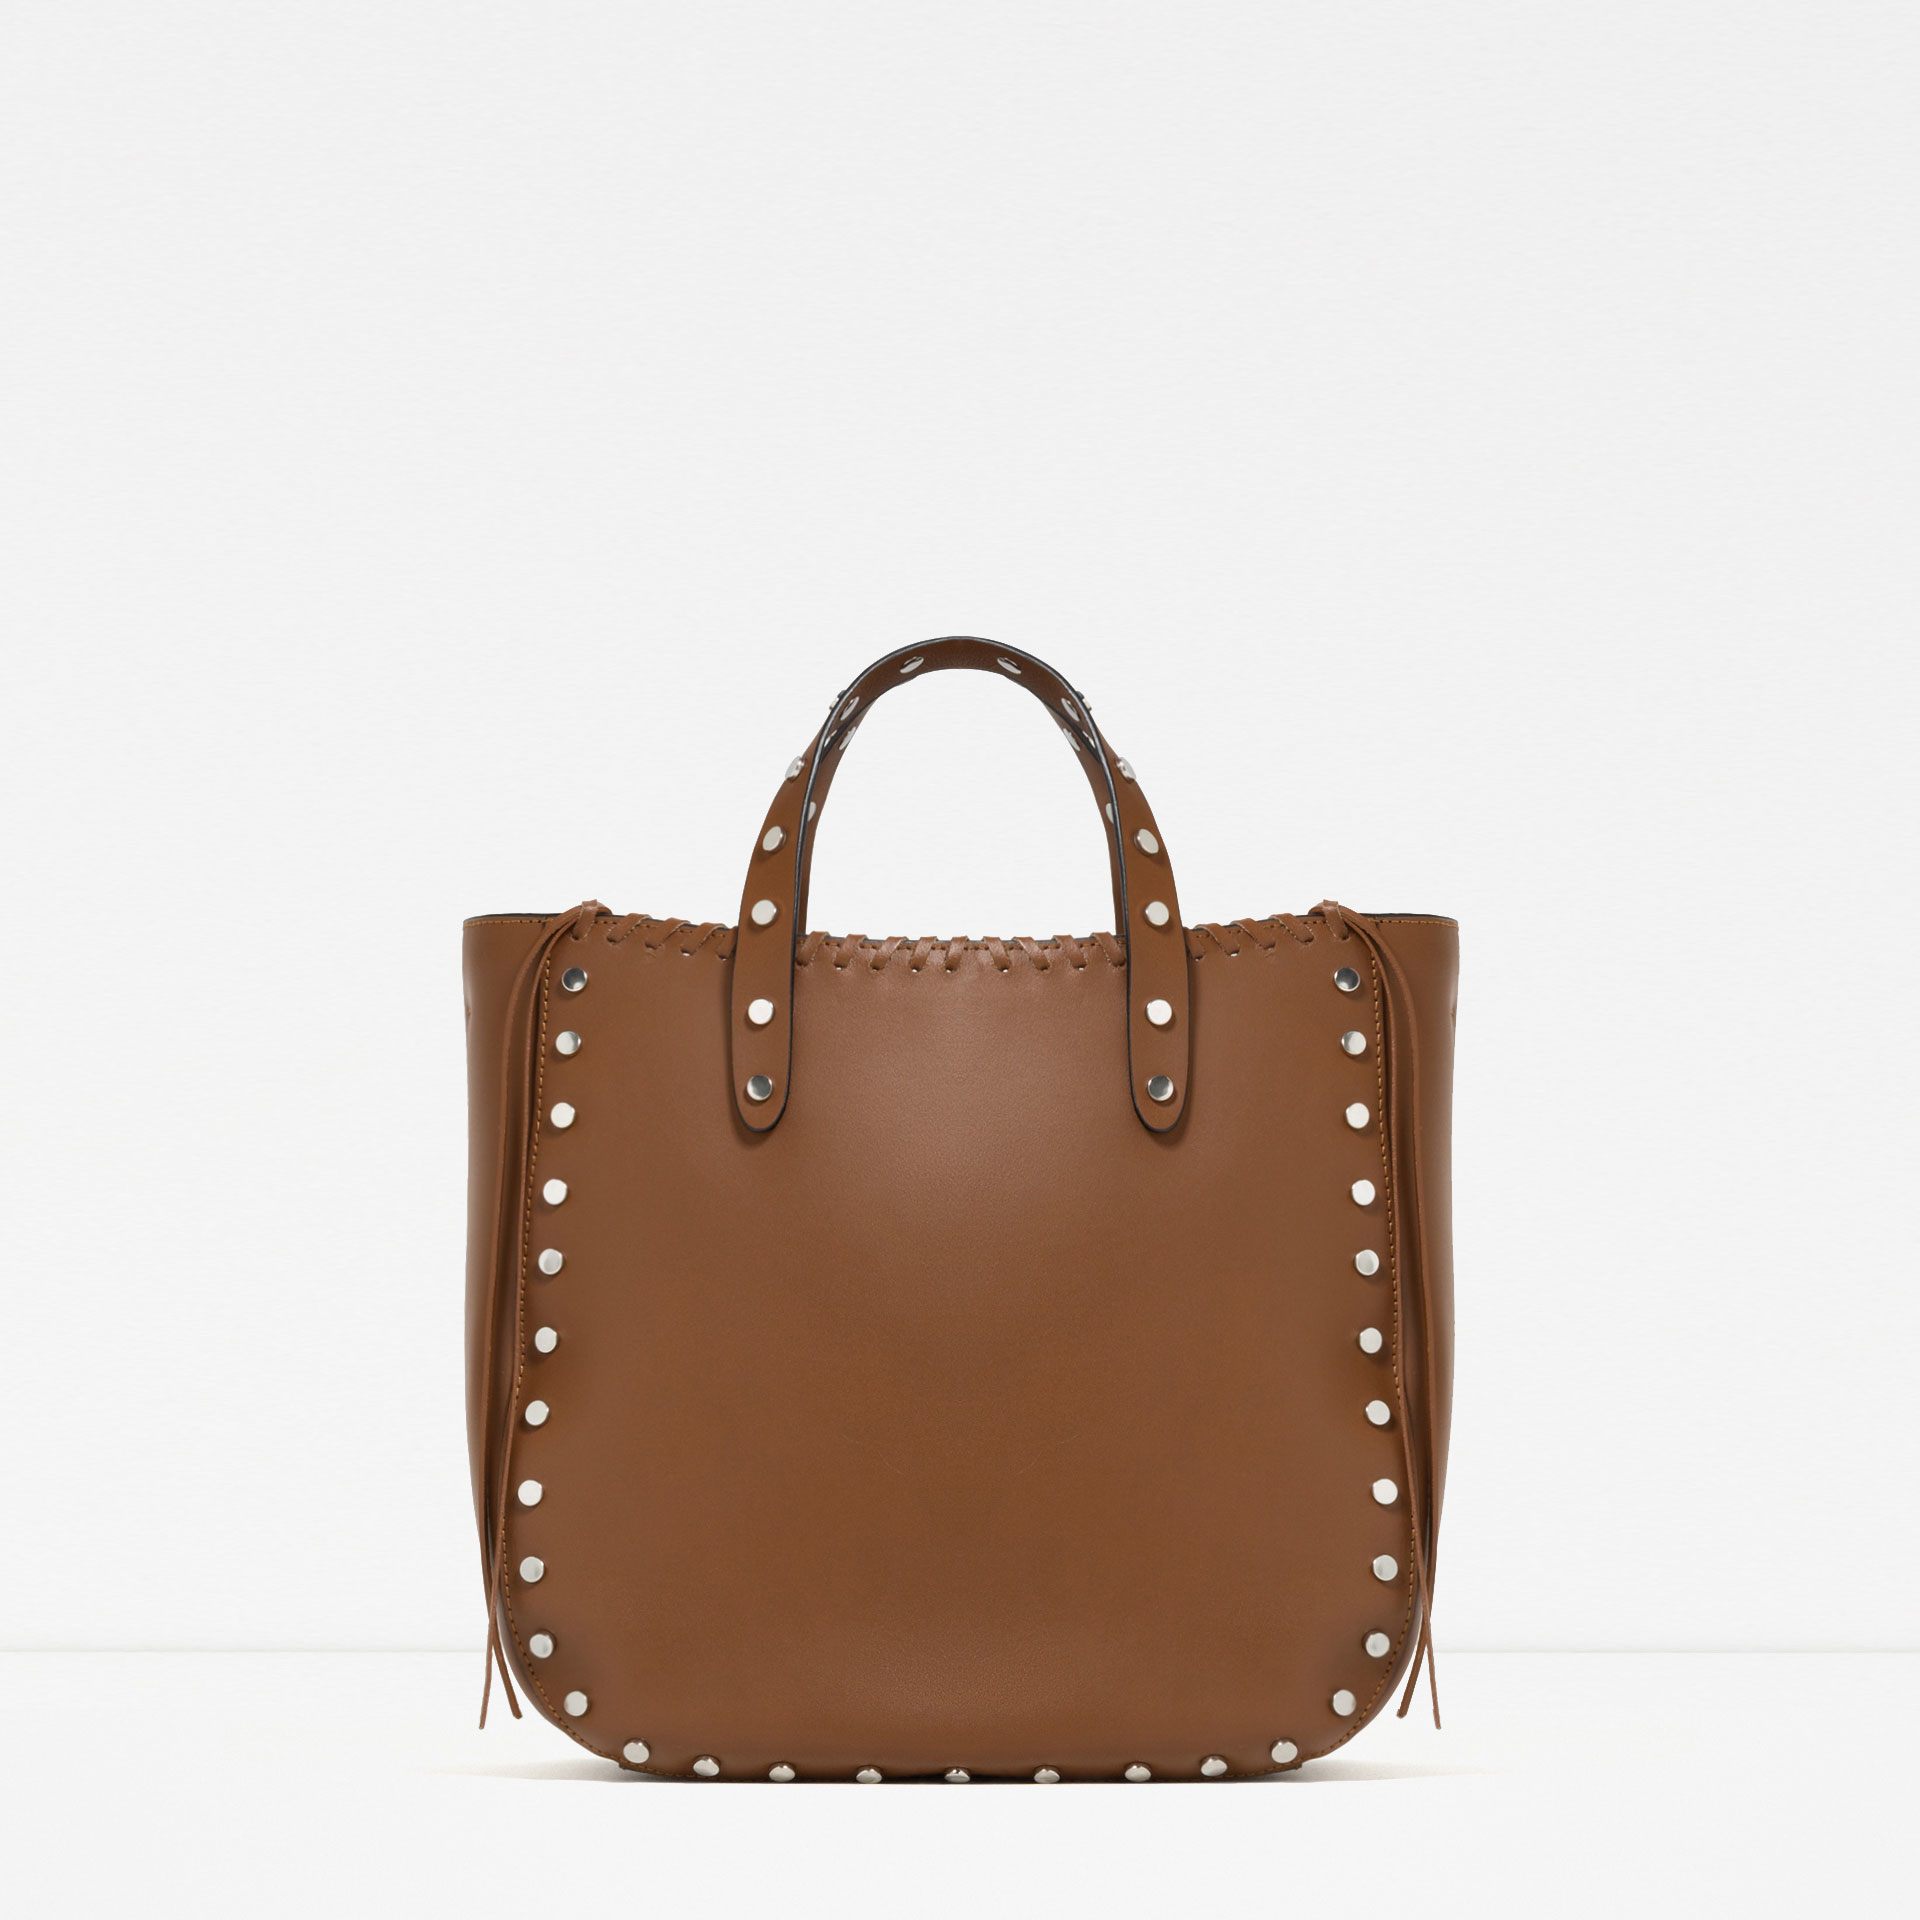 Zara Studded Leather Tote in Brown | Lyst